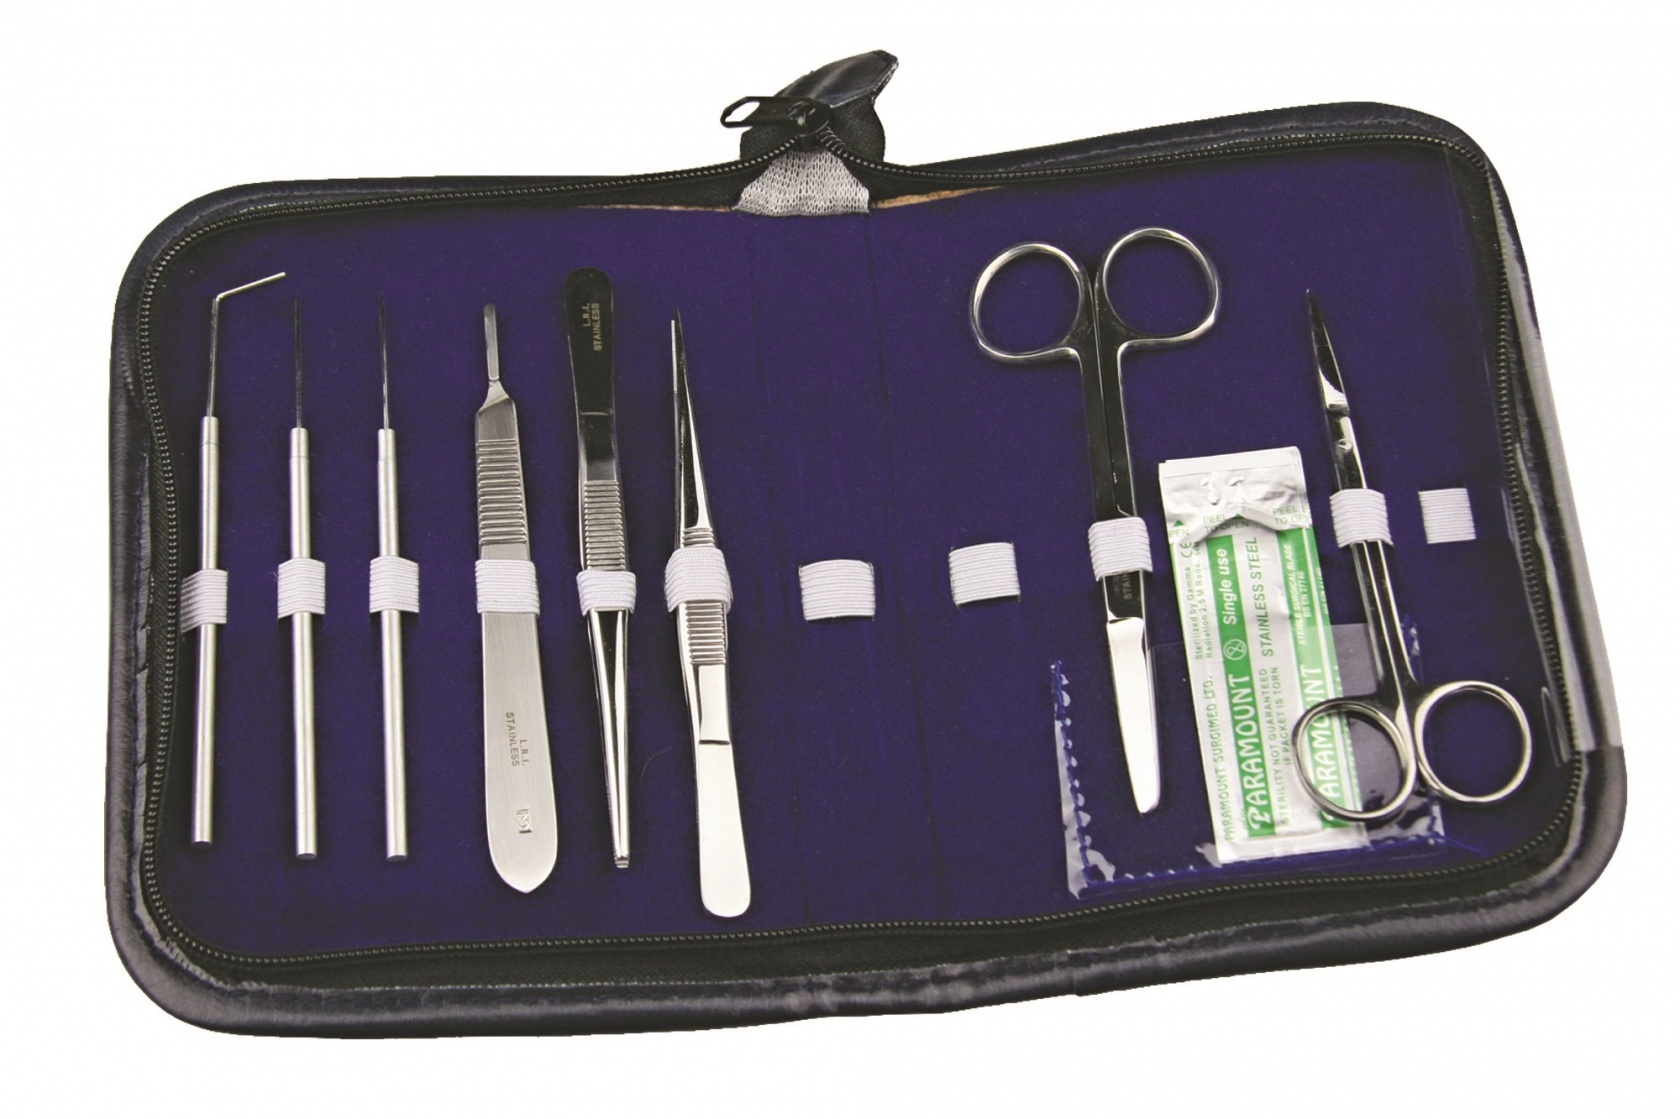 Basic Student Dissecting Kit 8 Instruments in Zip Wallet